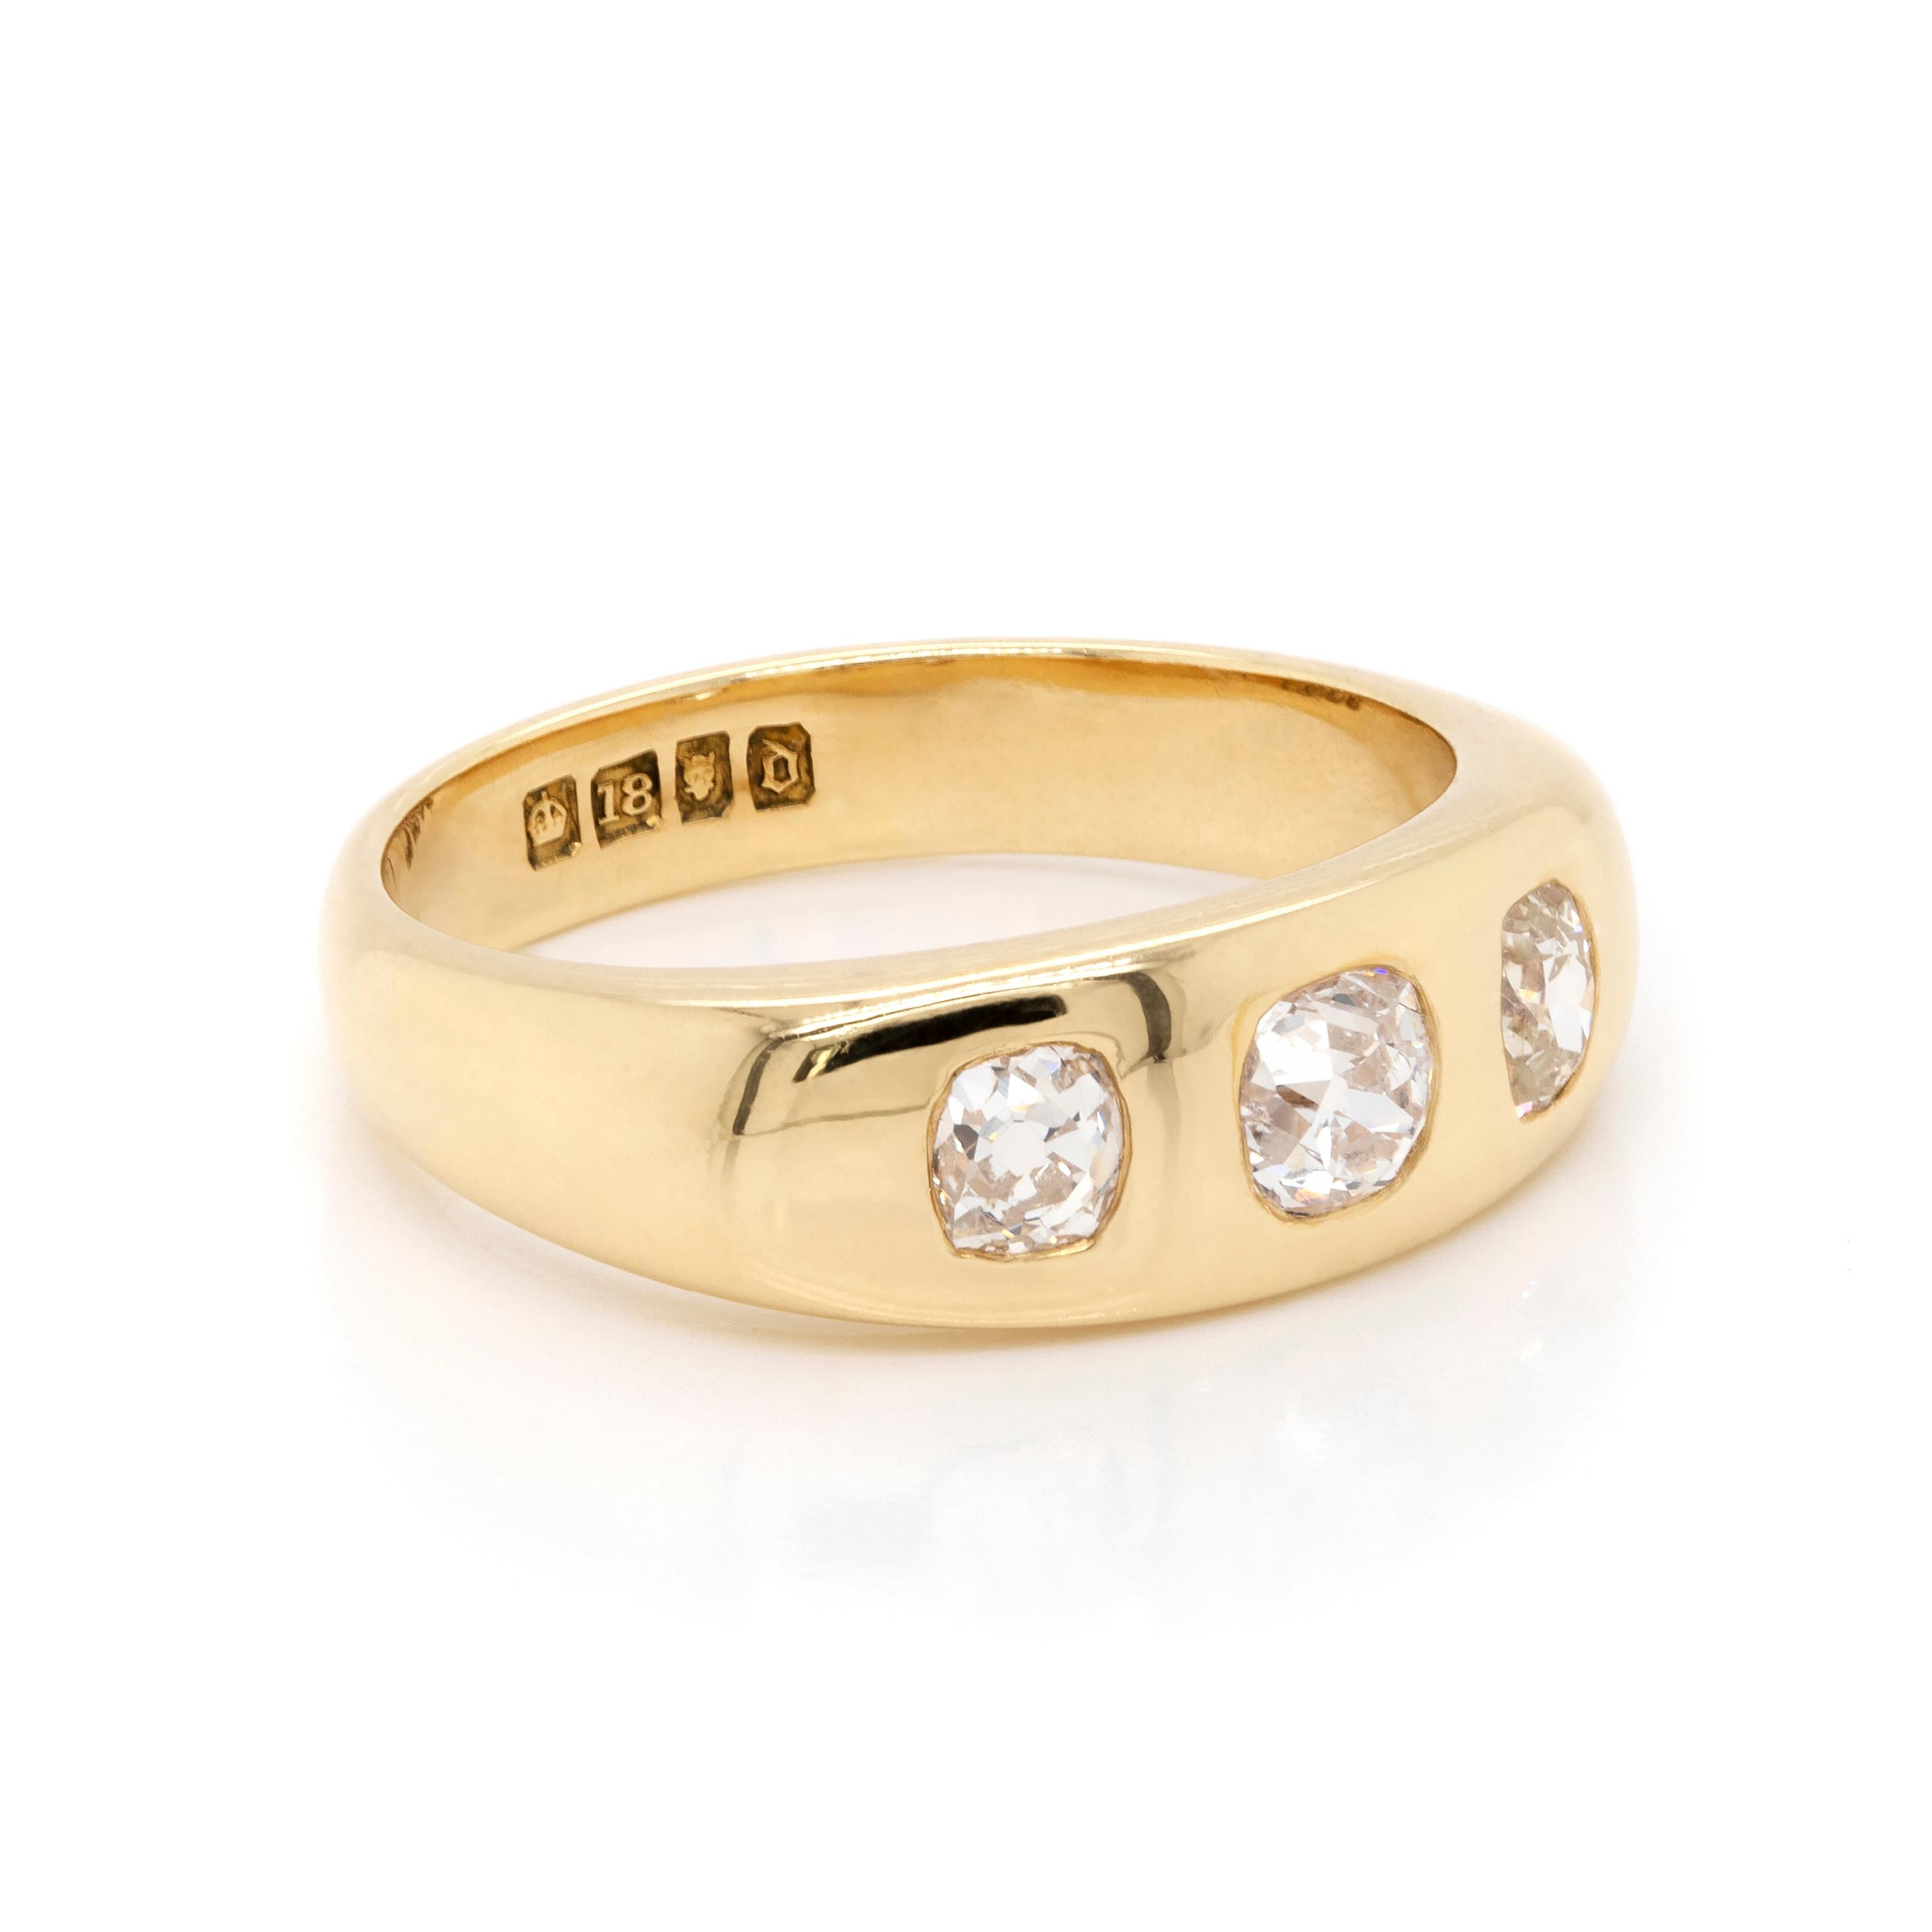 This beautiful antique gents ring, dating from 1919, features three old mine cut diamonds with a total carat weight of 1.04 carats, all mounted in 18 carat yellow gold rub-over settings. Hallmarked 18. England, 1919. UK finger size 'O'.